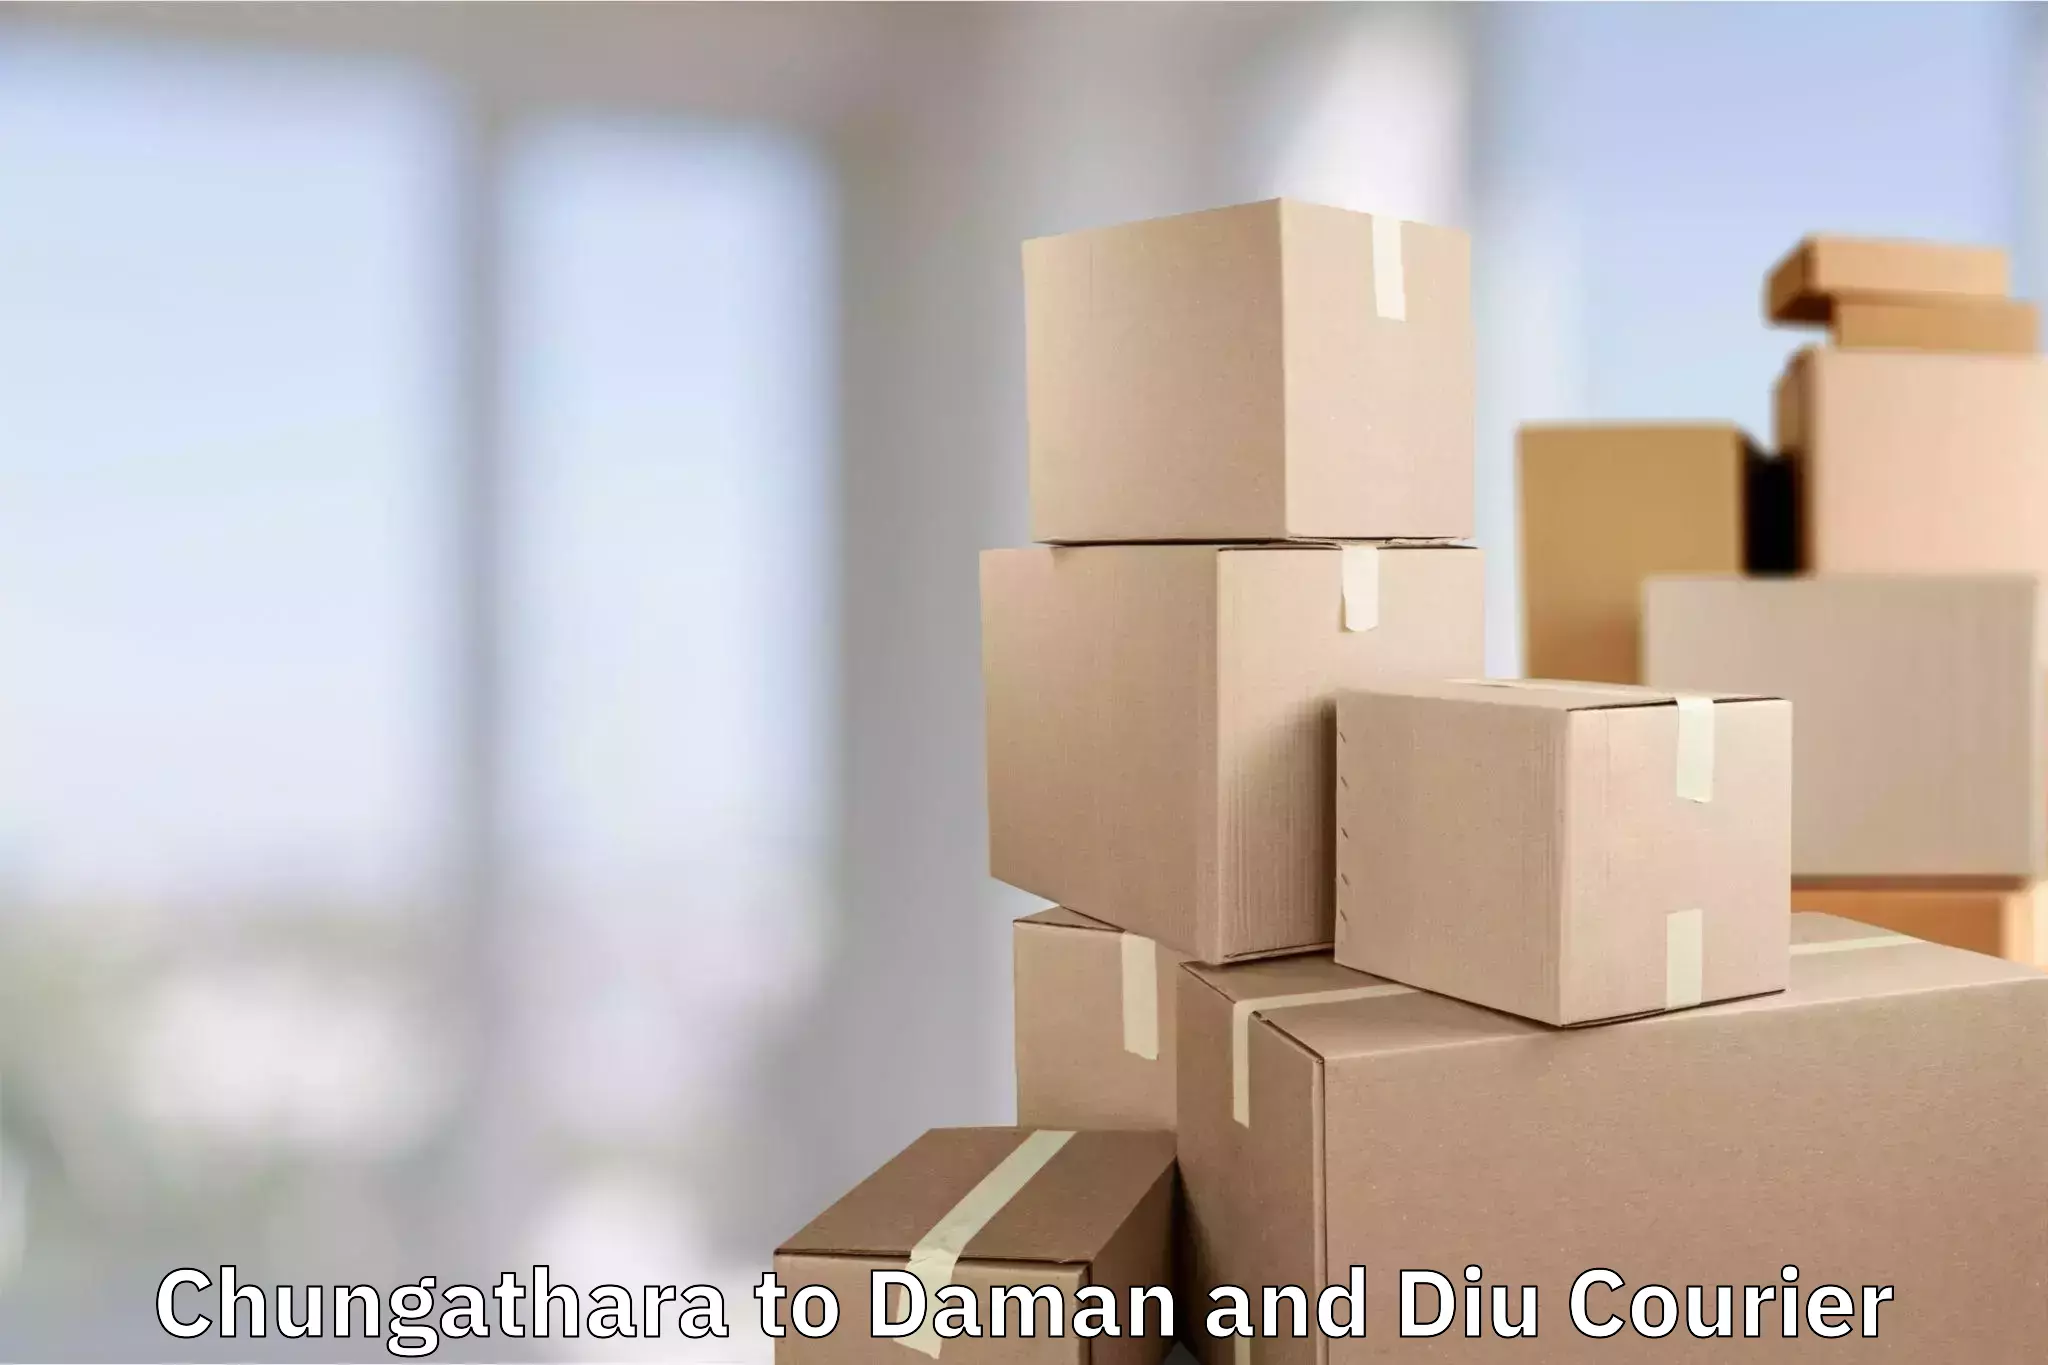 Airport luggage delivery in Chungathara to Daman and Diu